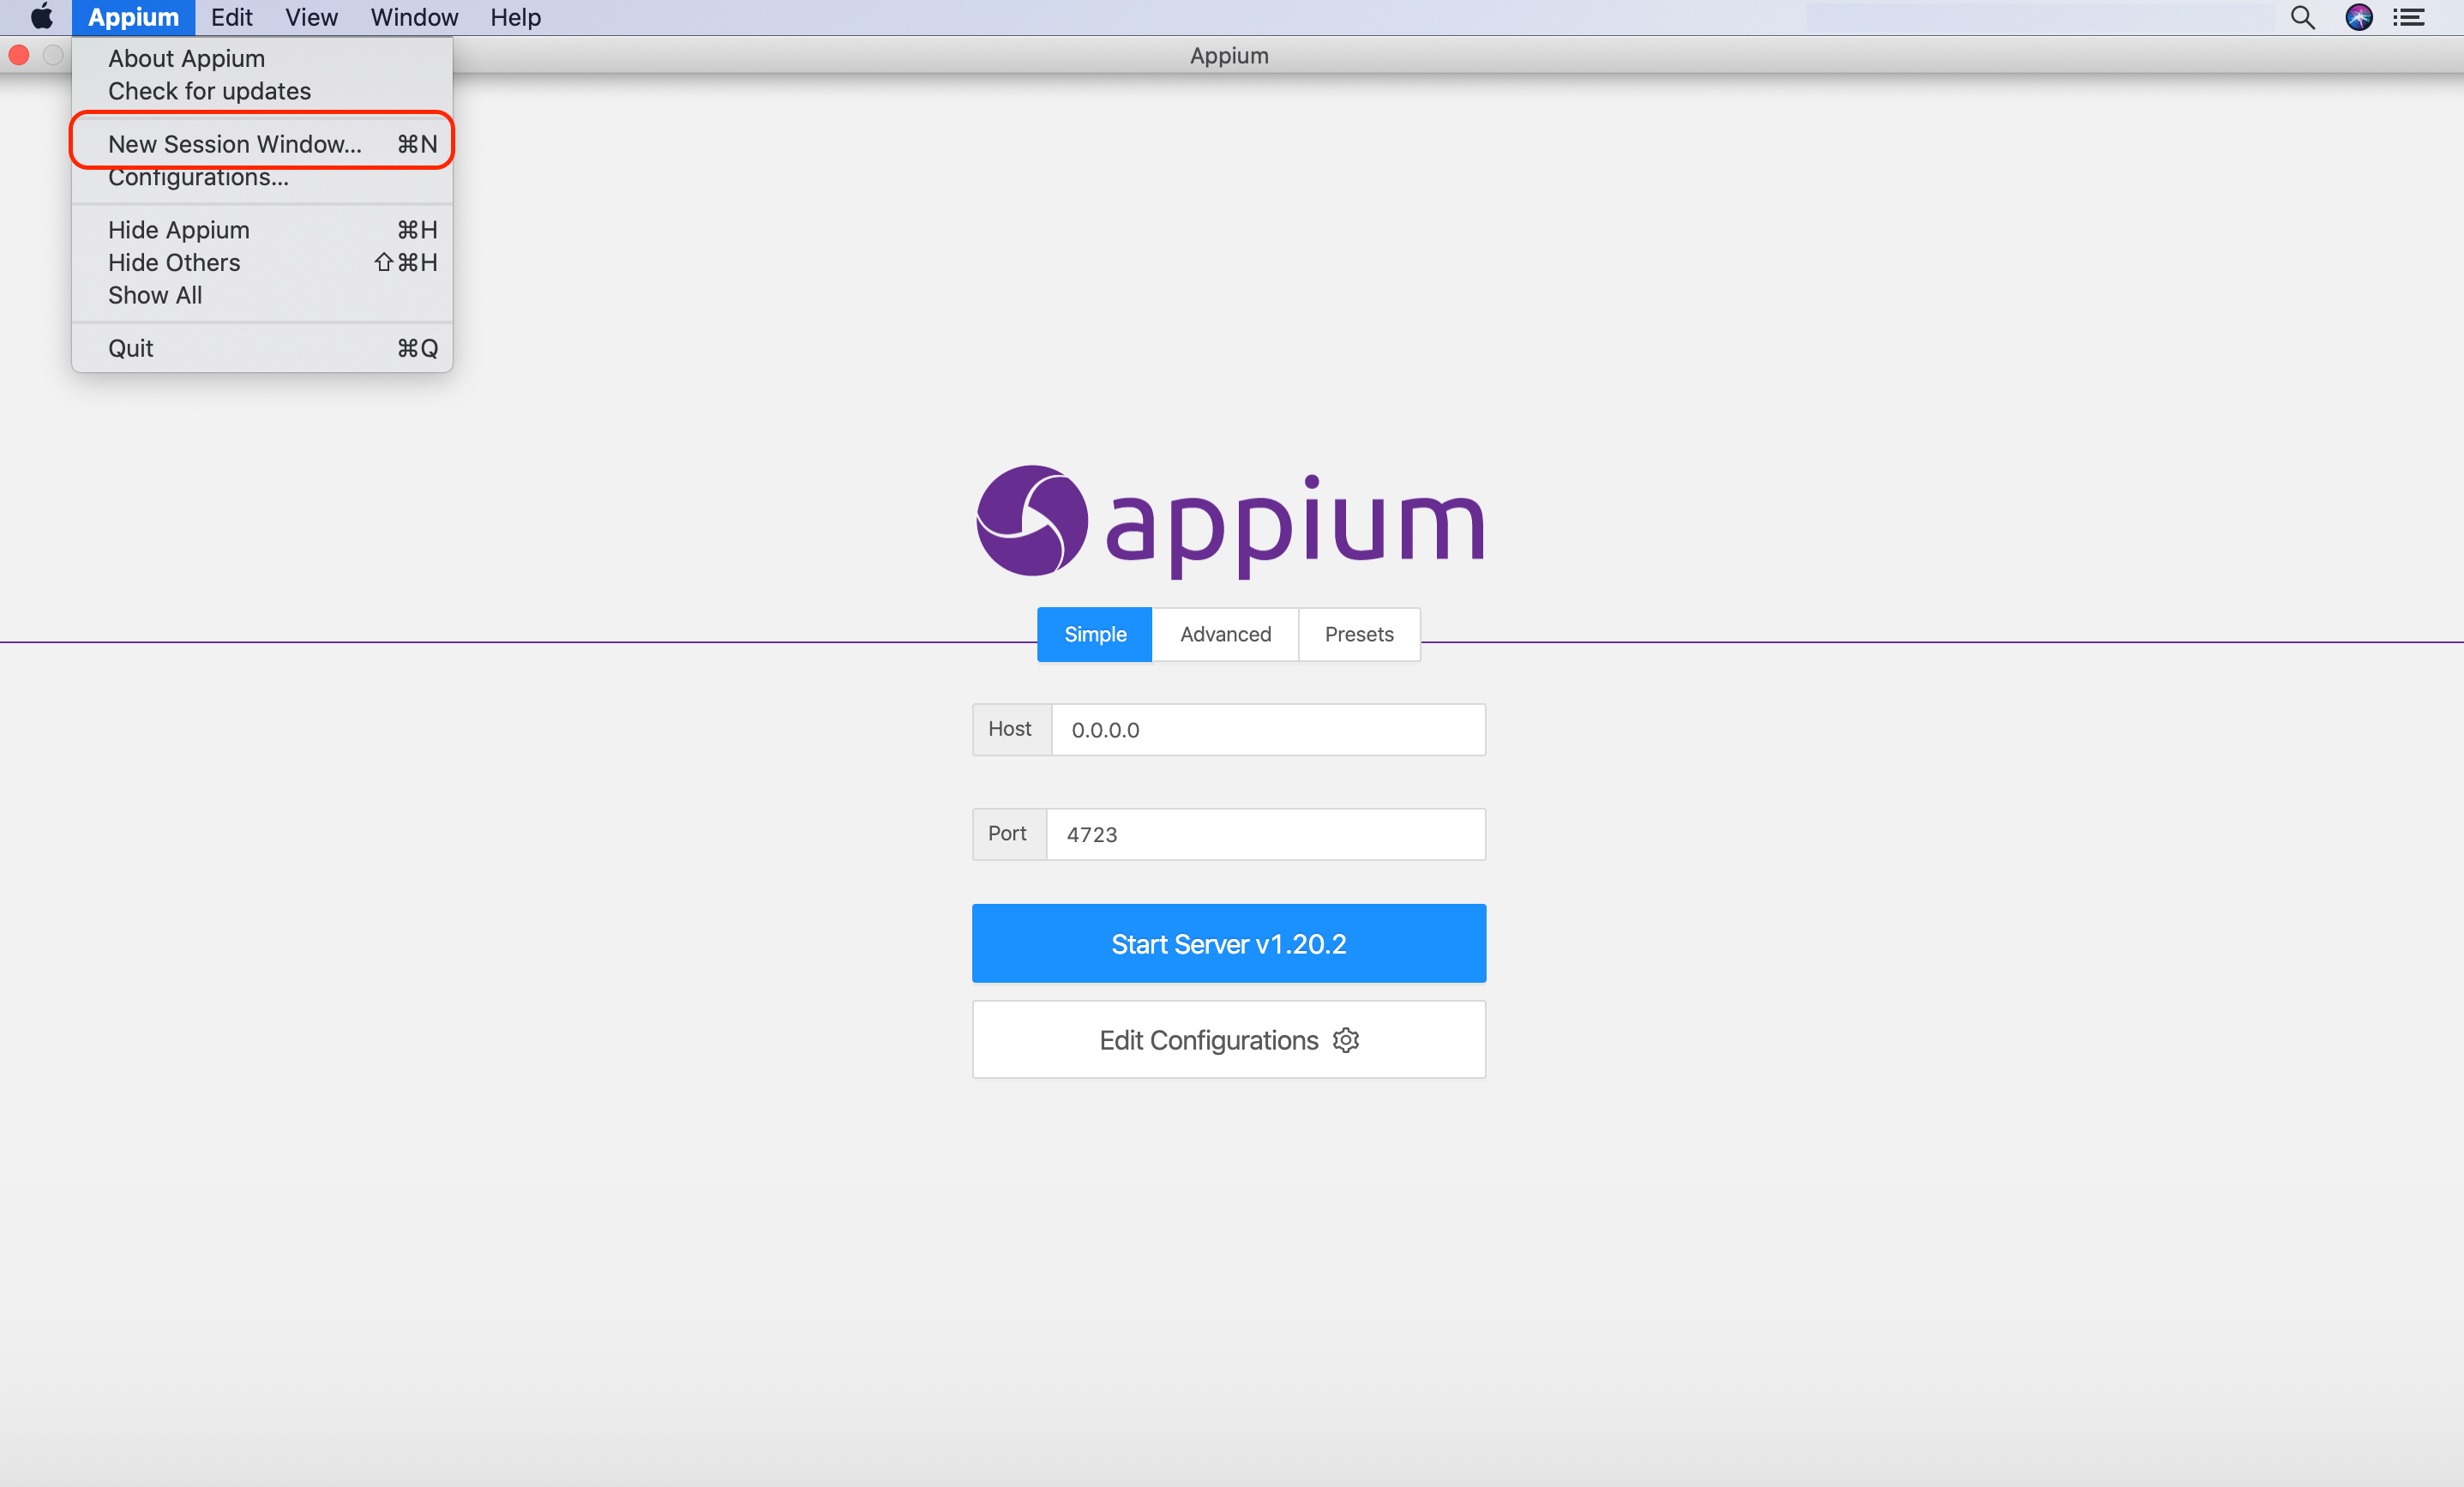 Start new session window from Appium